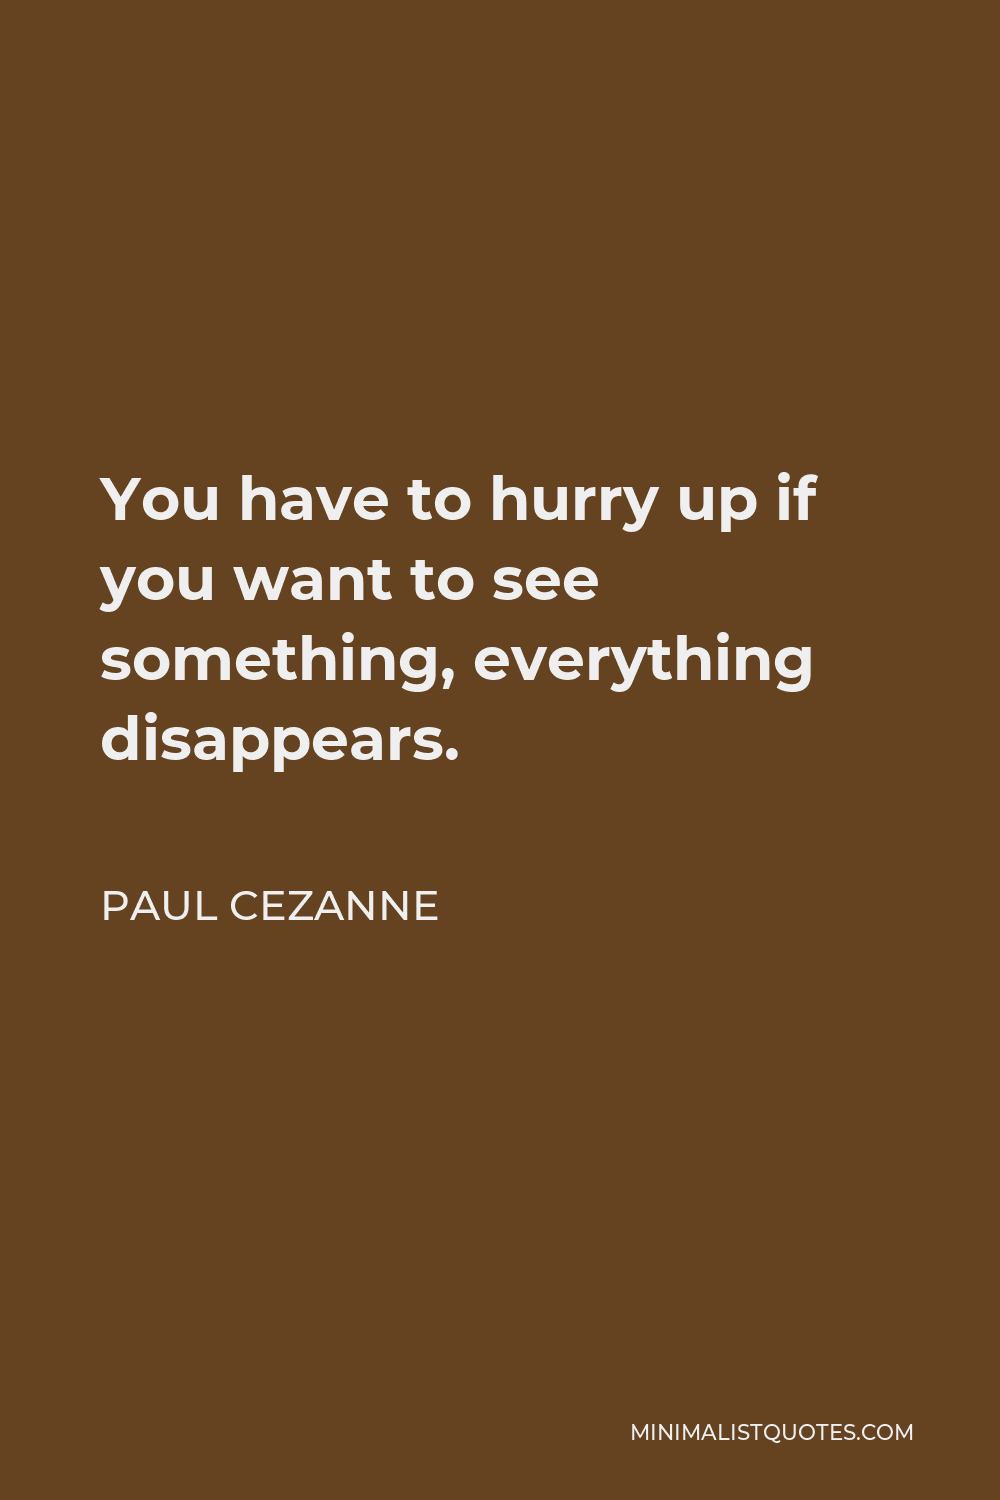 Paul Cezanne Quote: You have to hurry up if you want to see something ...